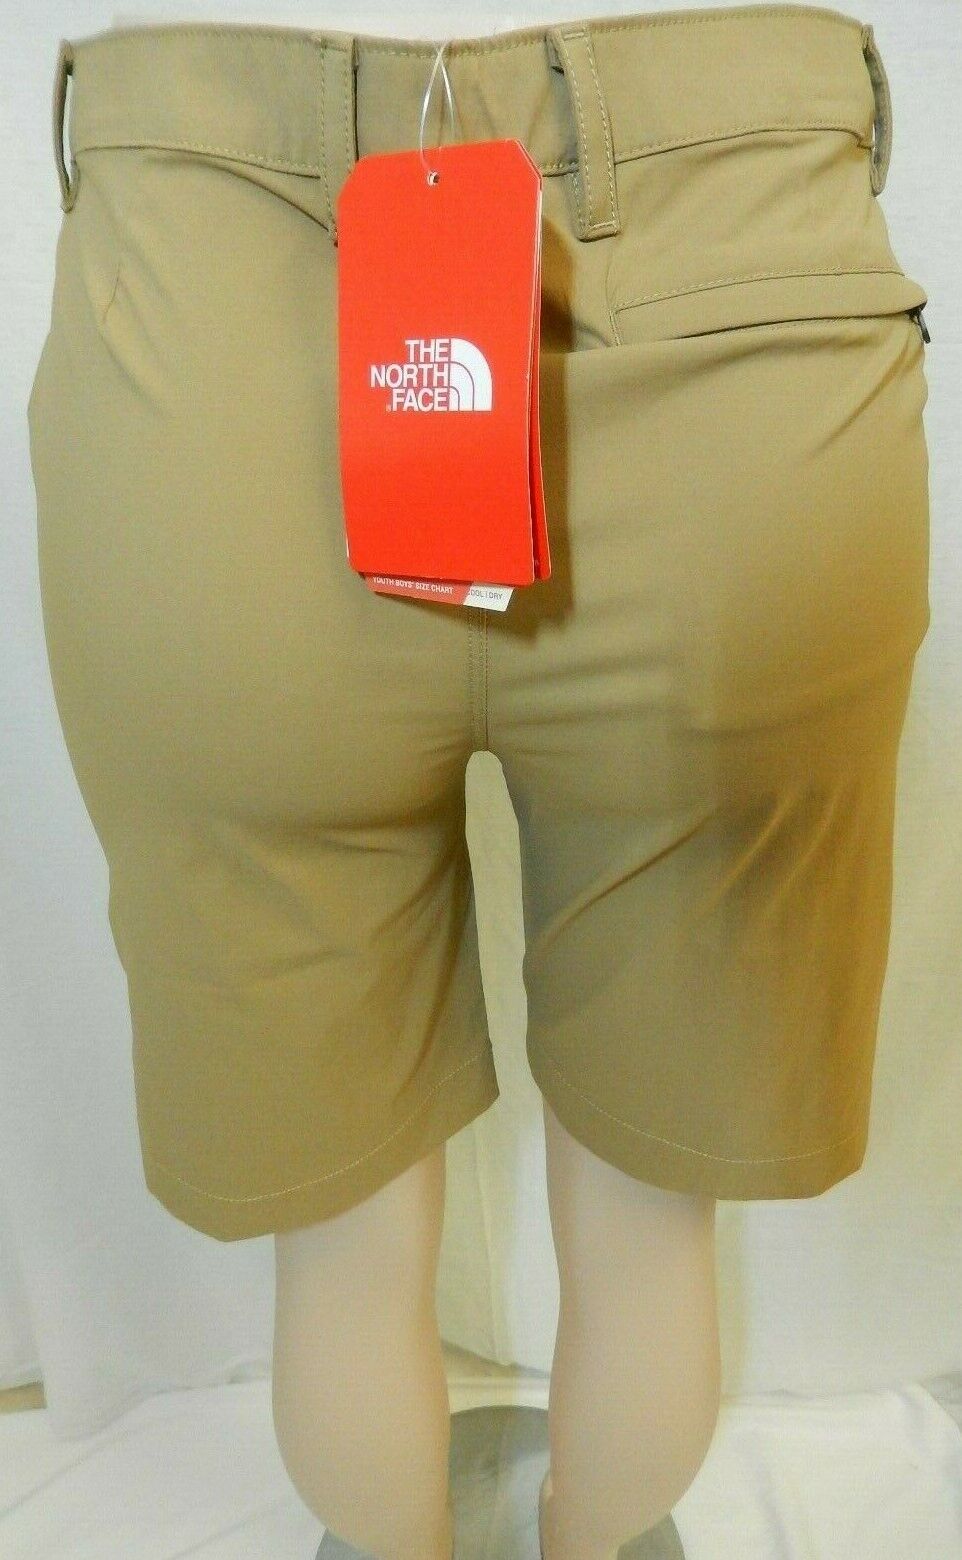 *NWT* THE NORTH FACE YOUTH BOYS TAN NYLON HIKING SPUR TRAIL SHORTS SIZE S(7/8)